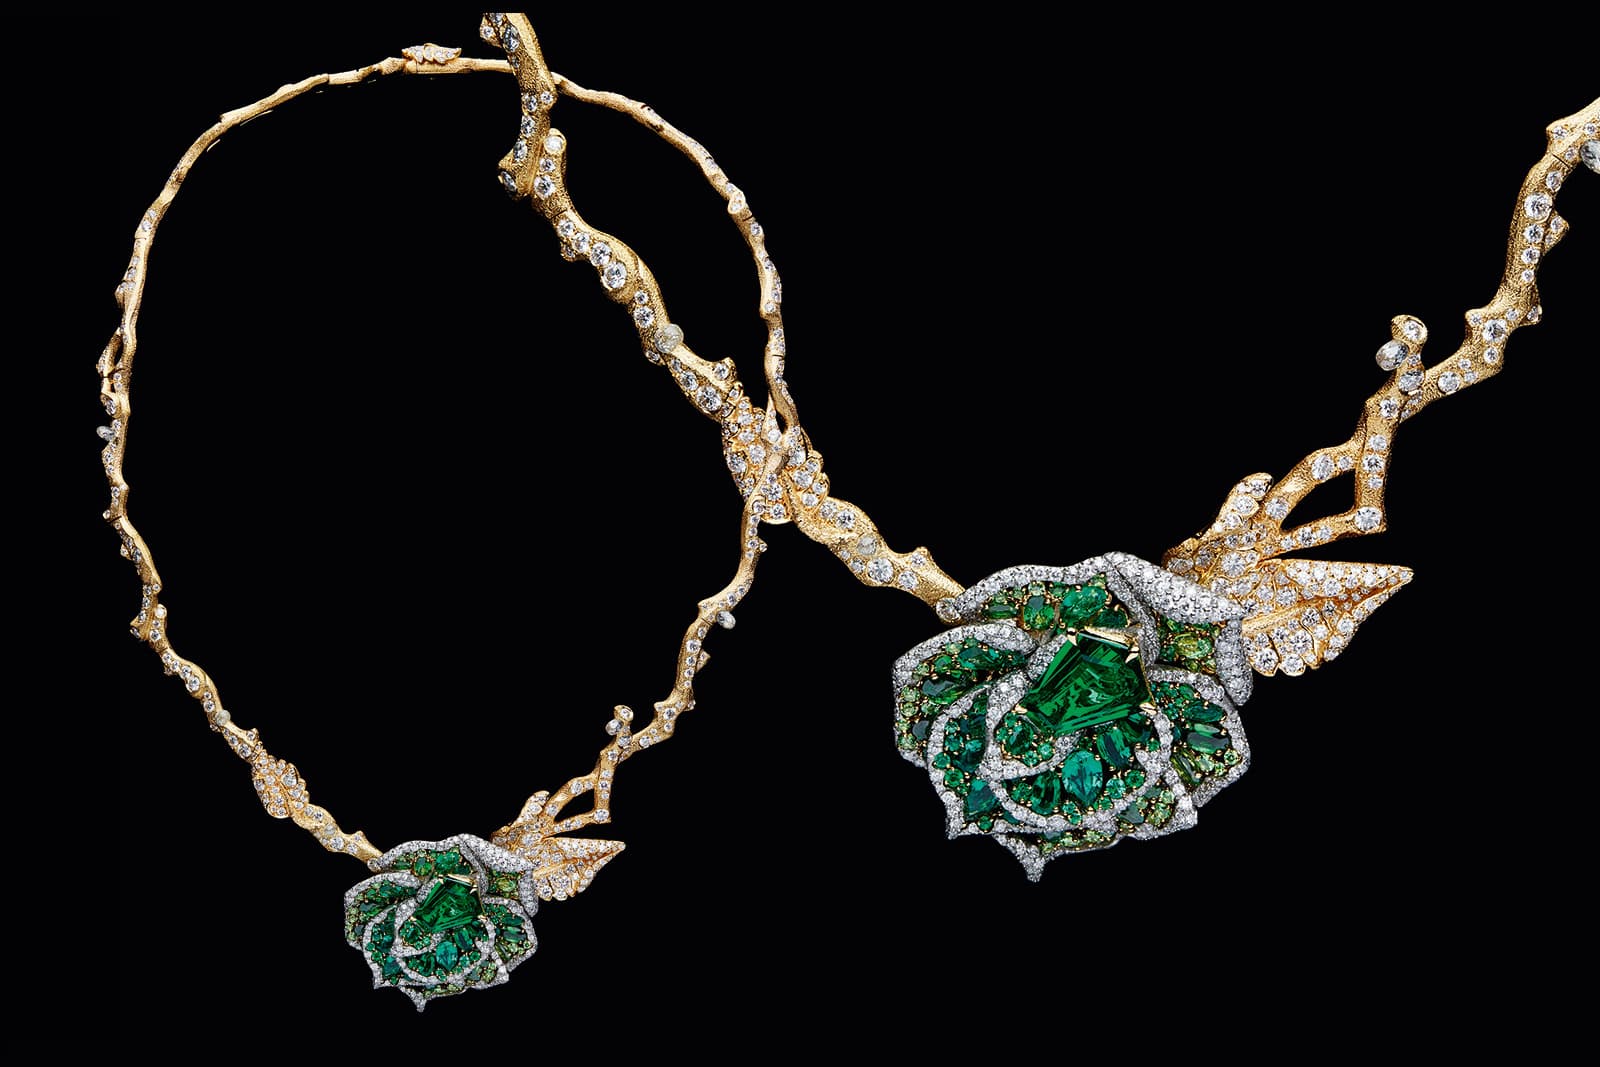 Dior RoseDior necklace in yellow gold, platinum and white gold with diamonds, emeralds and tsavorite garnets